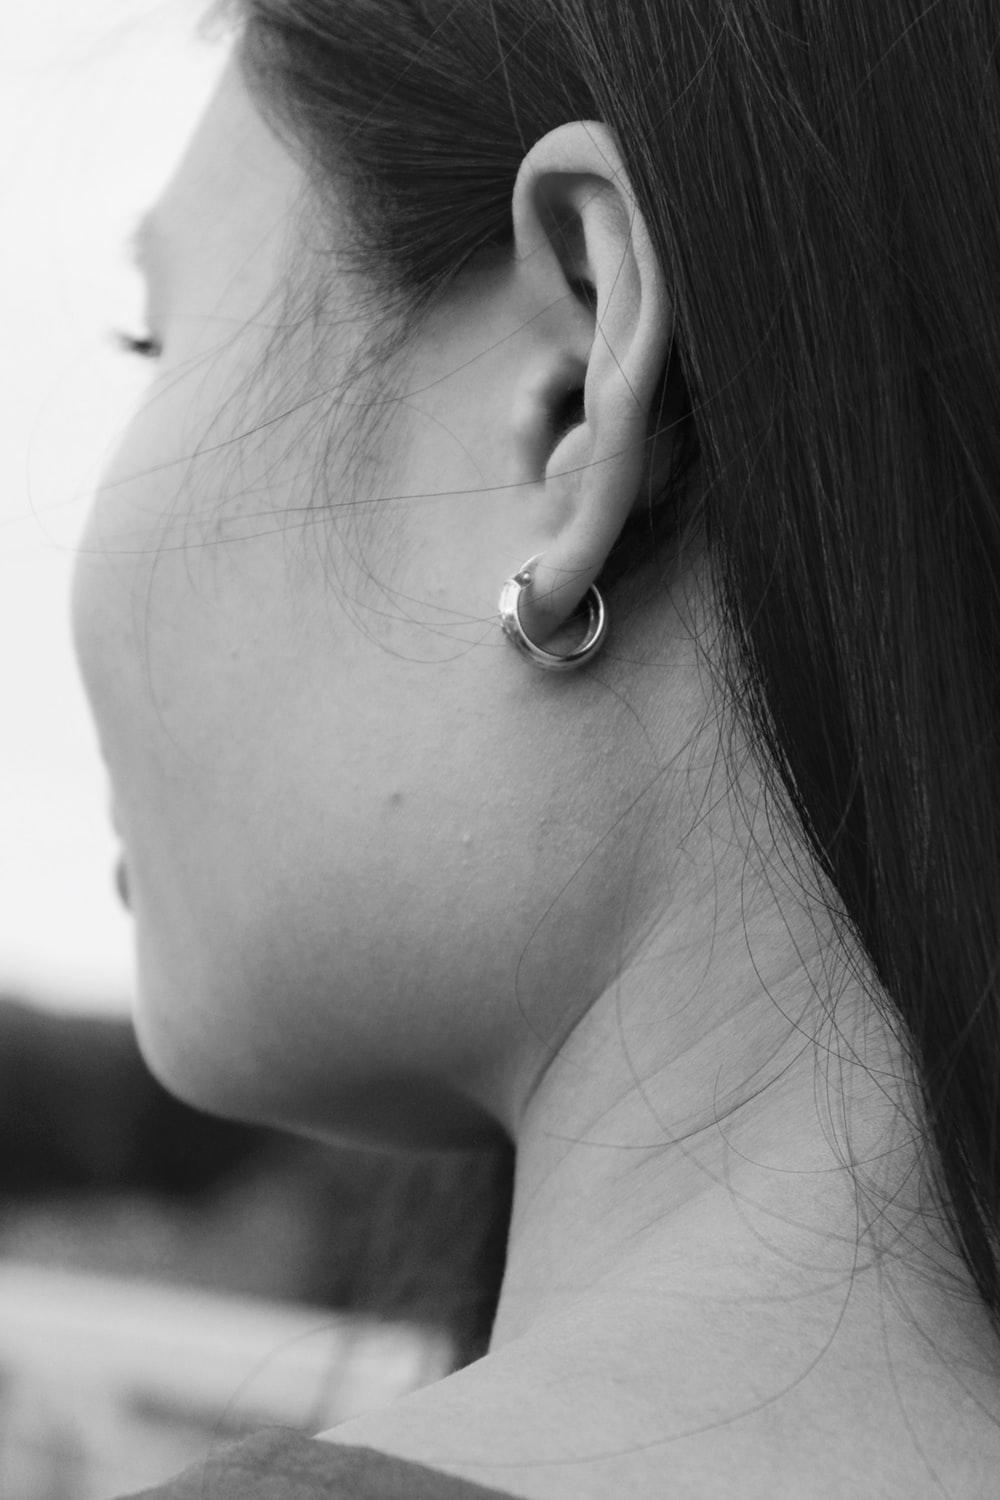 Ear Picture. Download Free Image